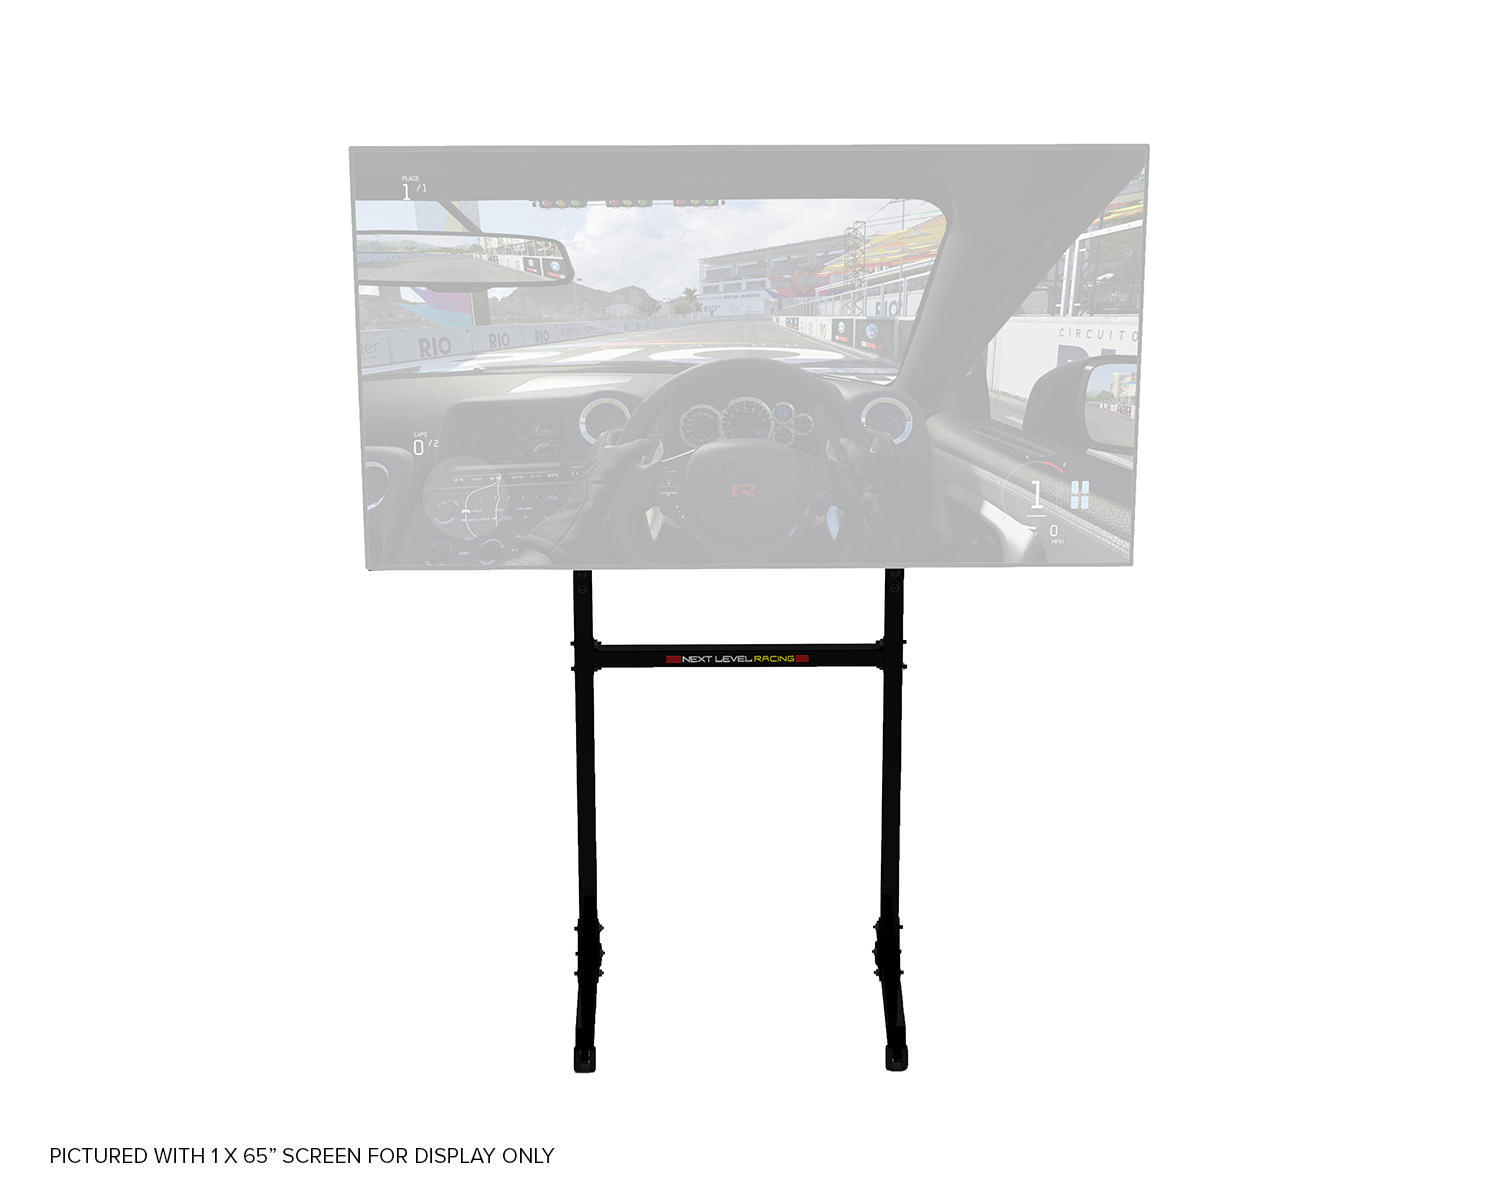 NEXT LEVEL Single Standing Monitor ® RACING Stand Free